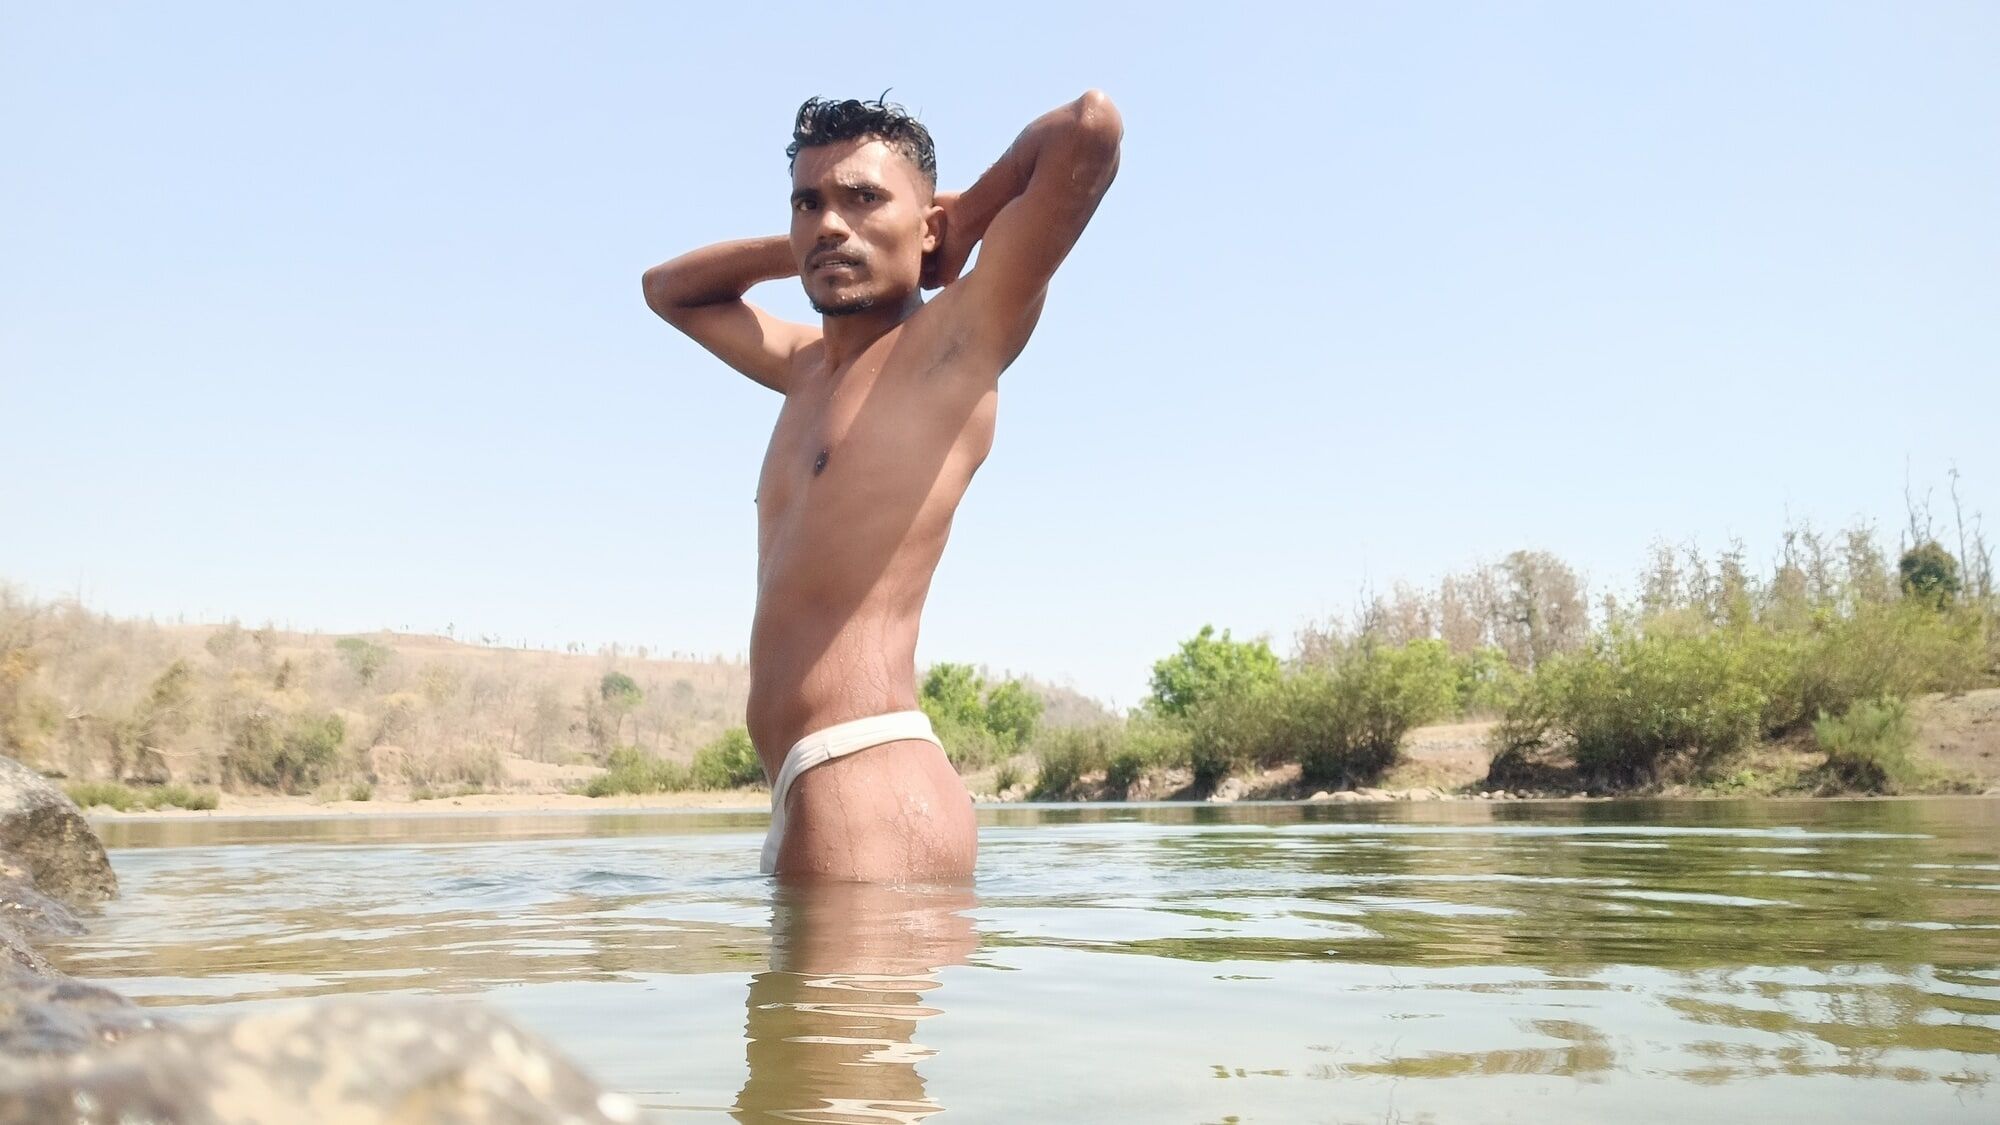 Sanju gamit on river advanture hot and sexy looking in man  #36